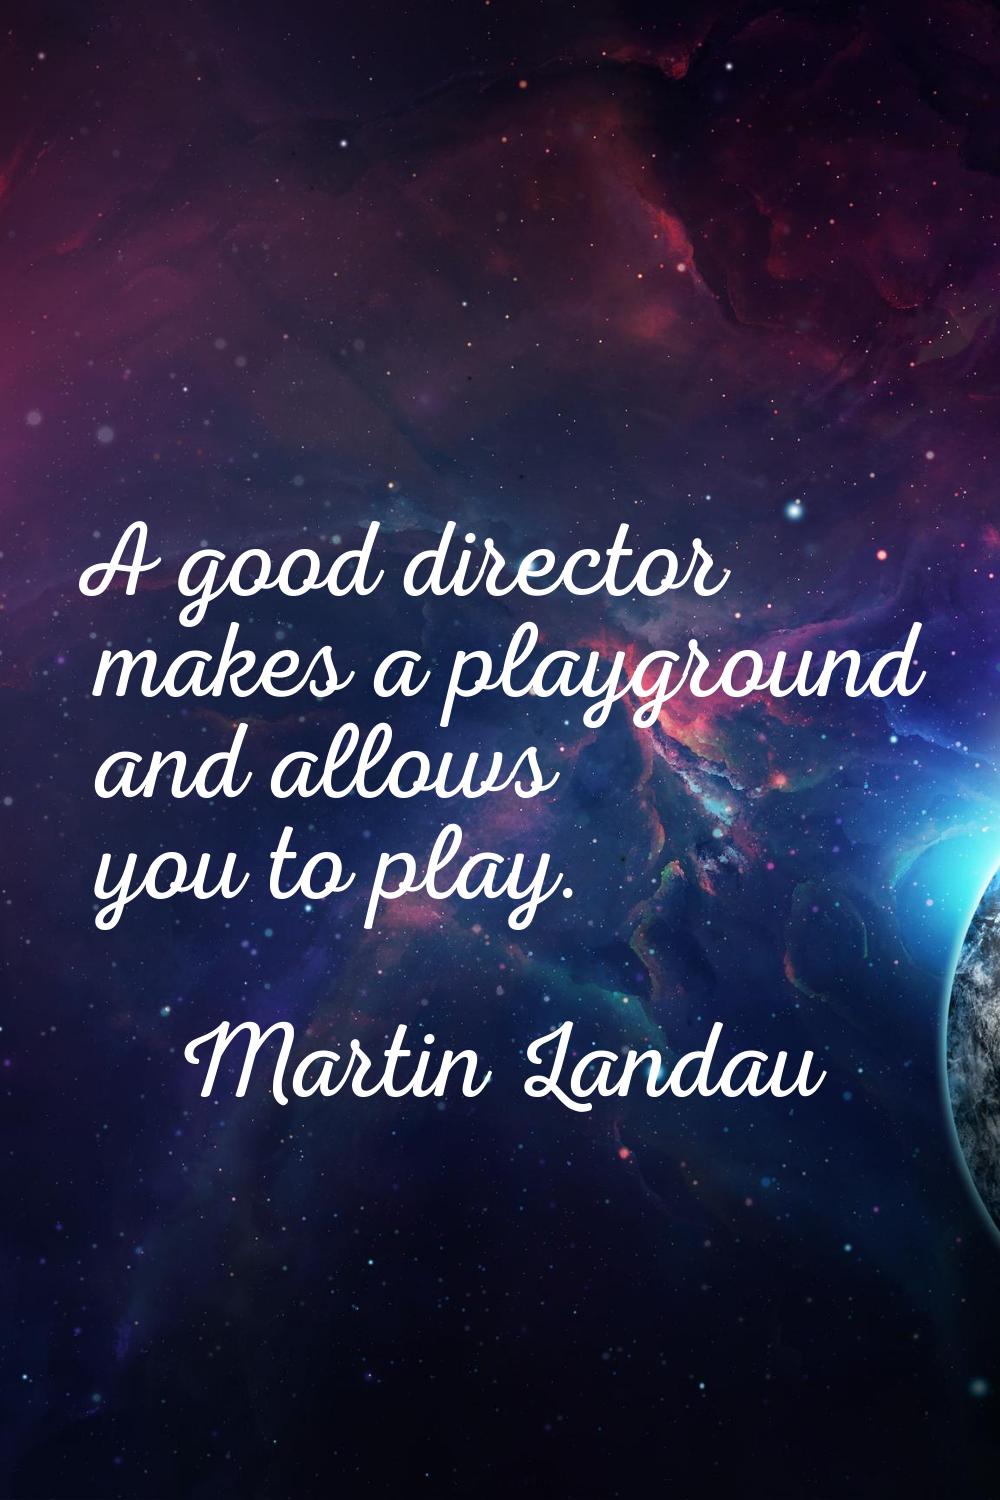 A good director makes a playground and allows you to play.